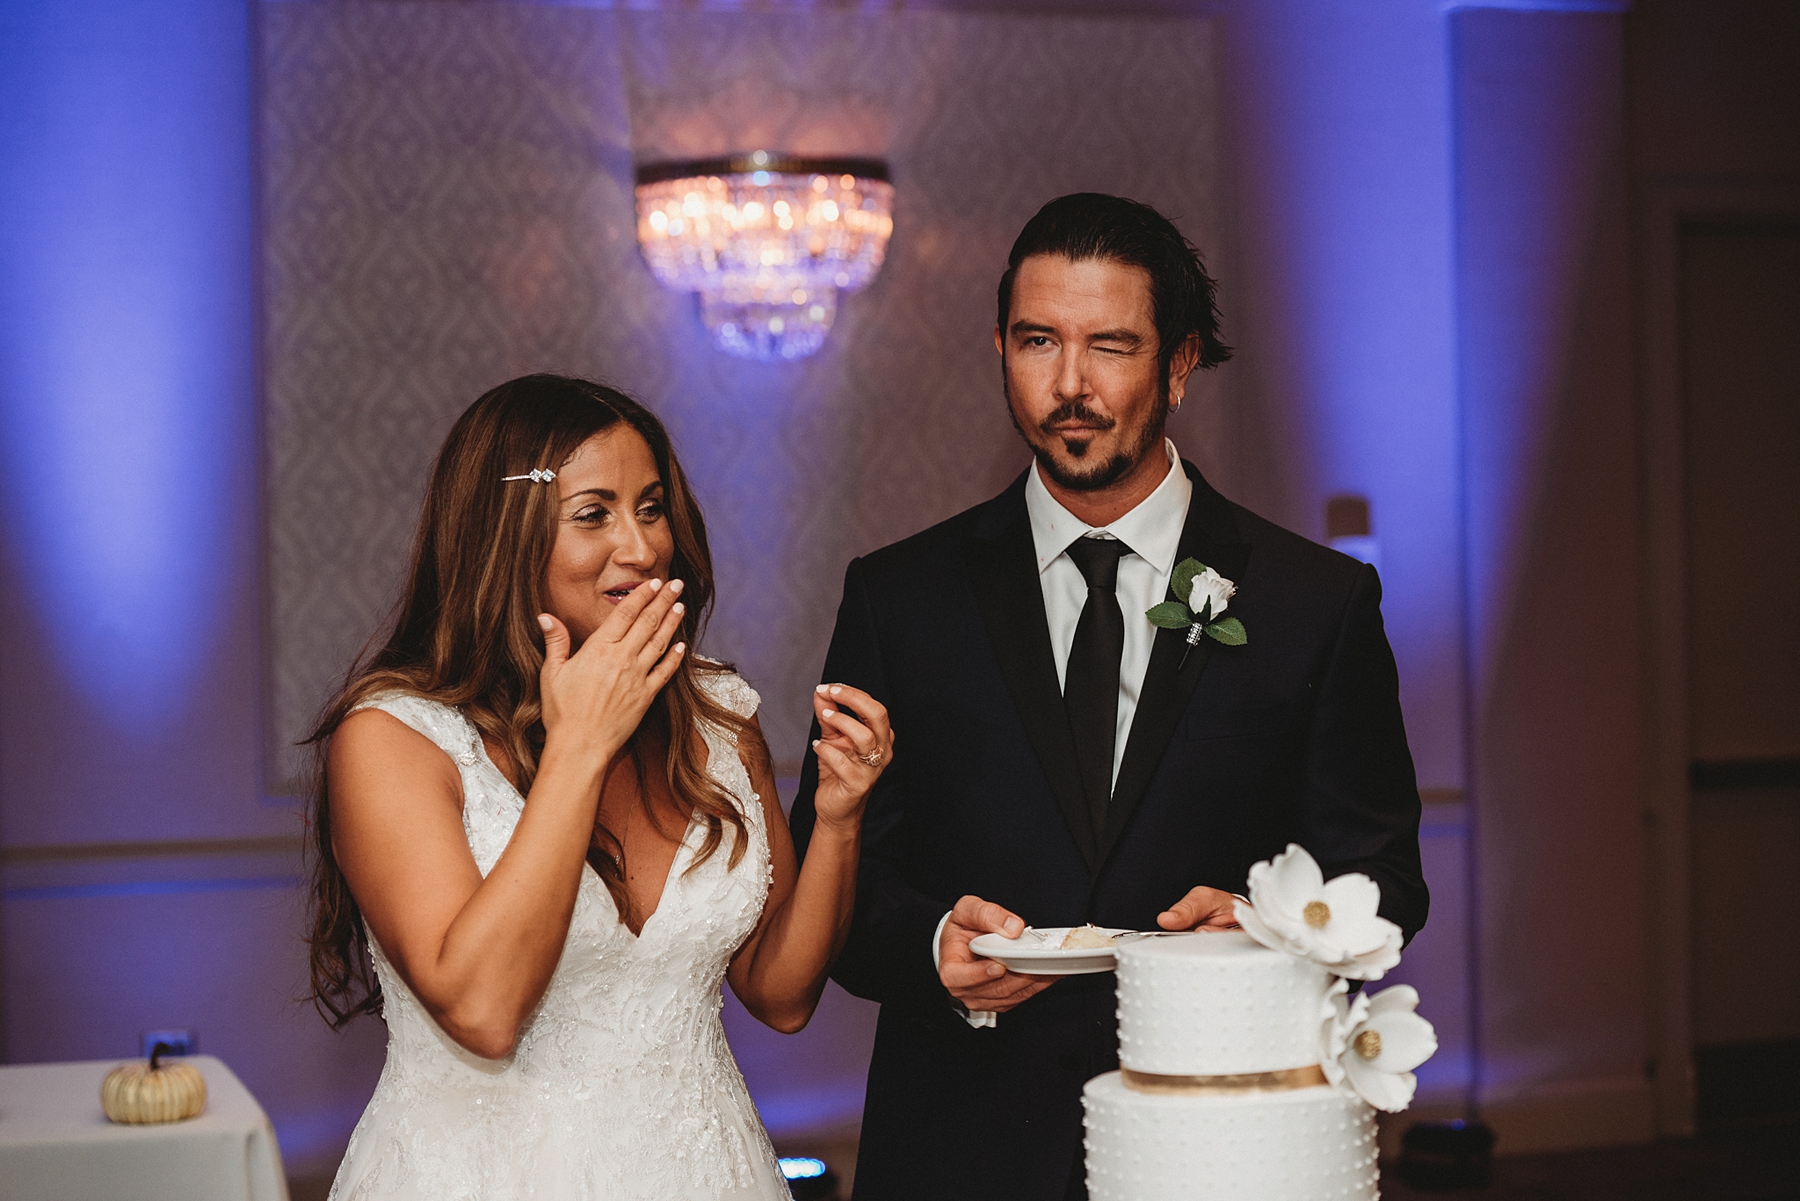 bride and groom cut their wedding cake at reception